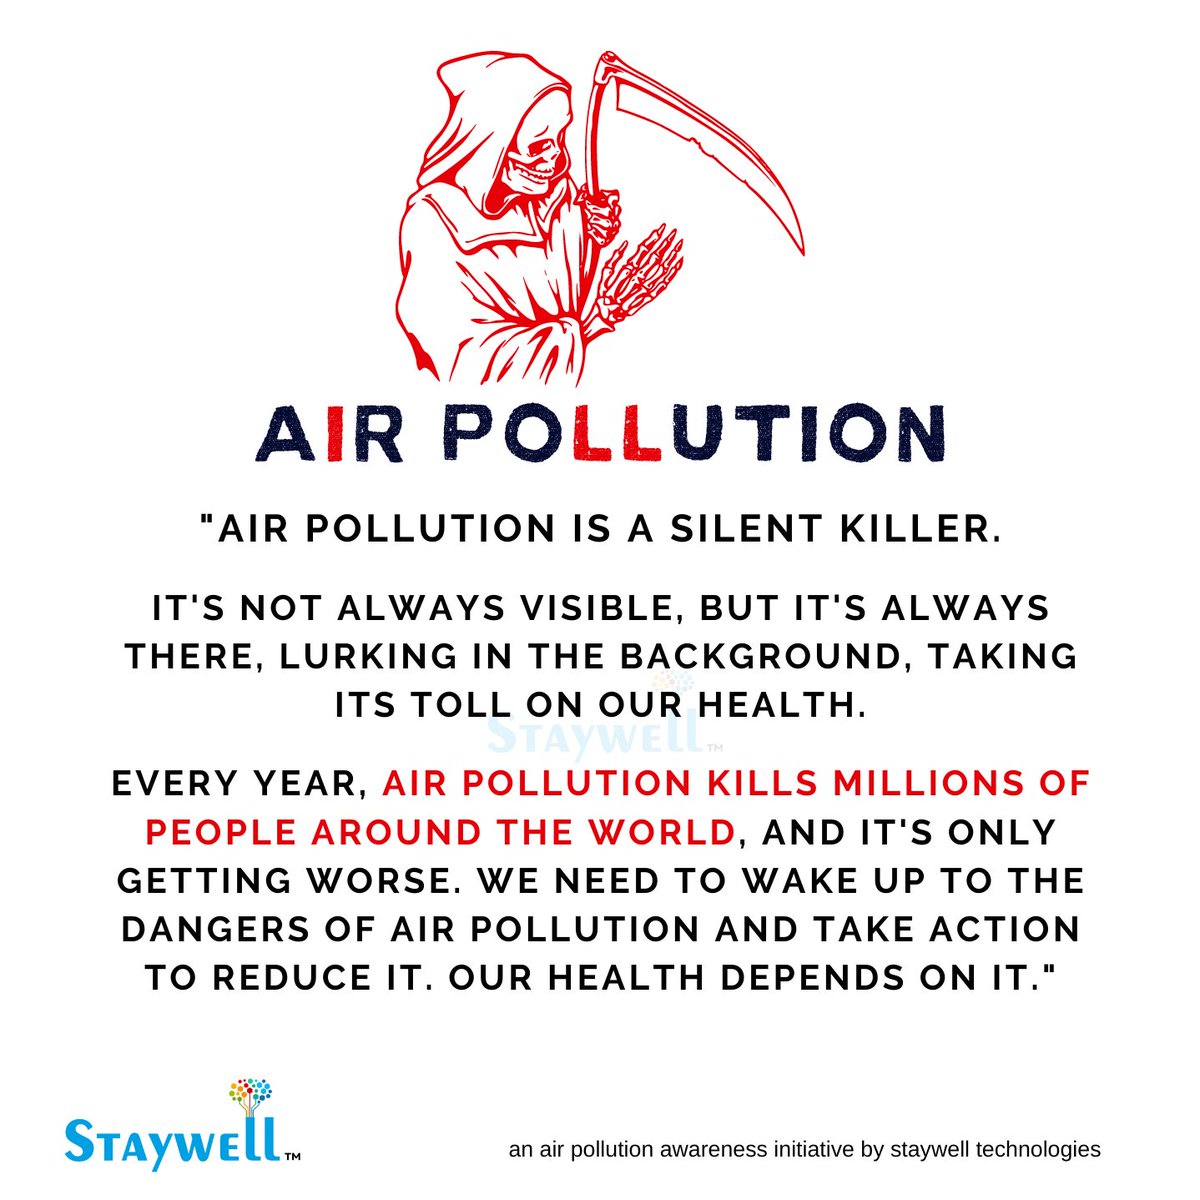 #AirPollutionIsReal
#AirPollutionKills
#SilentKiller
#AirPollutionAwareness
#CleanAirForAll
#ProtectOurHealth
#ActOnAirPollution
#StayWellTechnologies
#AirPollutionSolutions
#WeCanDoThis